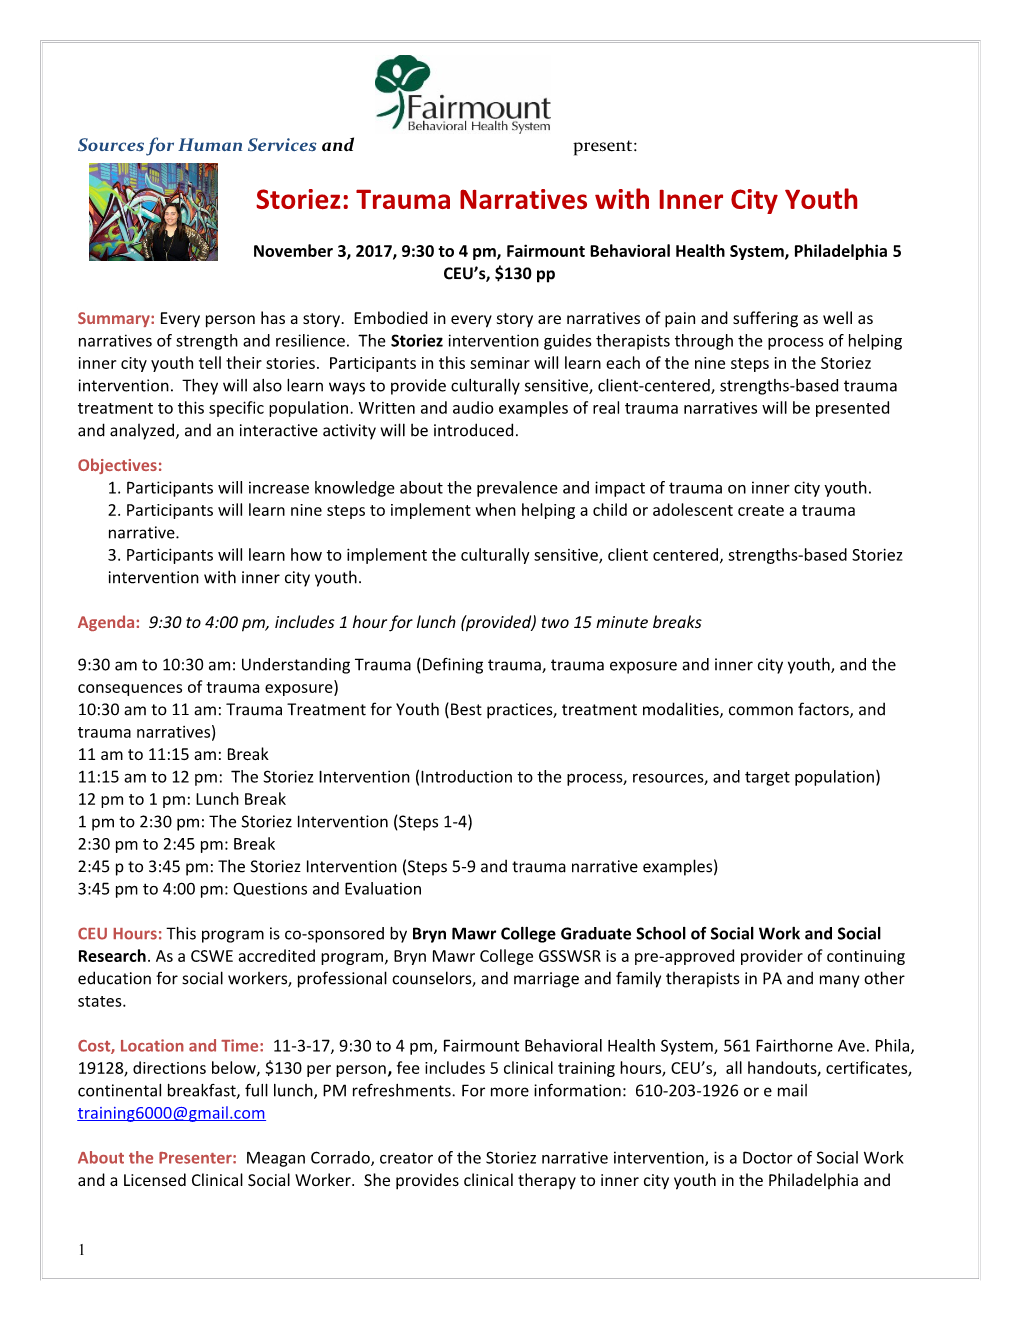 Storiez: Trauma Narratives with Inner City Youth